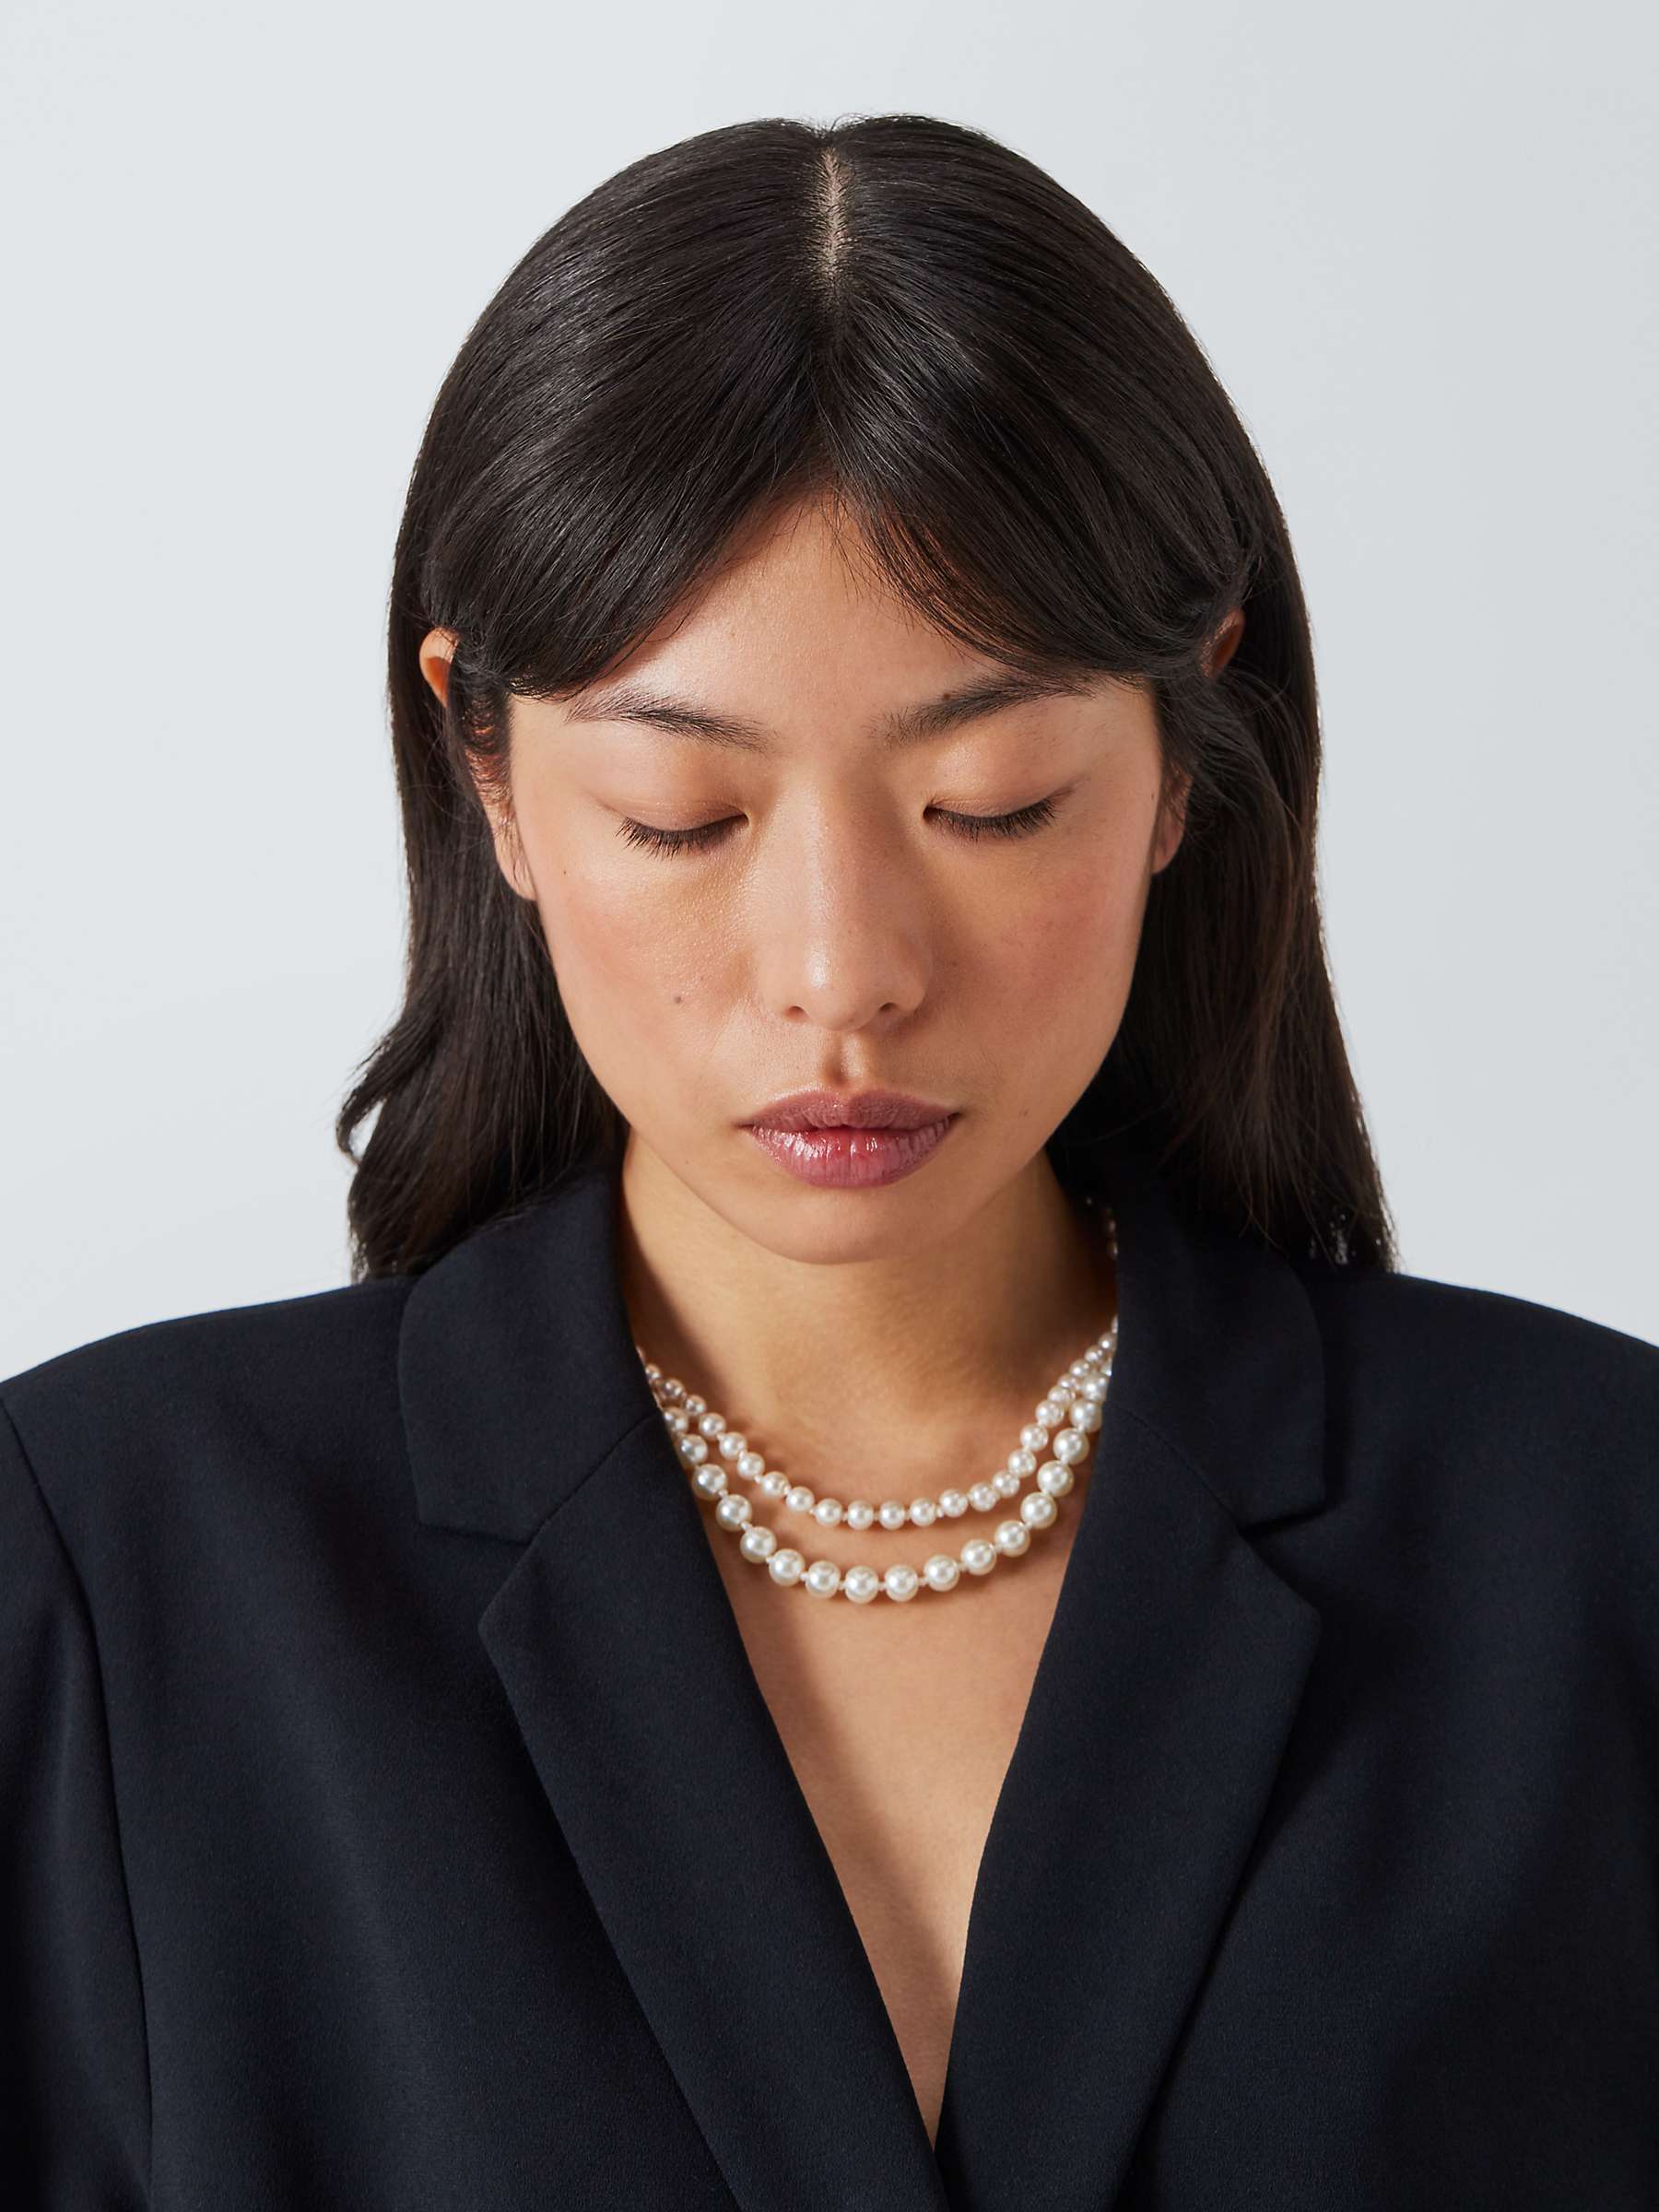 Buy John Lewis Faux Pearl Layered Necklace, Cream Online at johnlewis.com